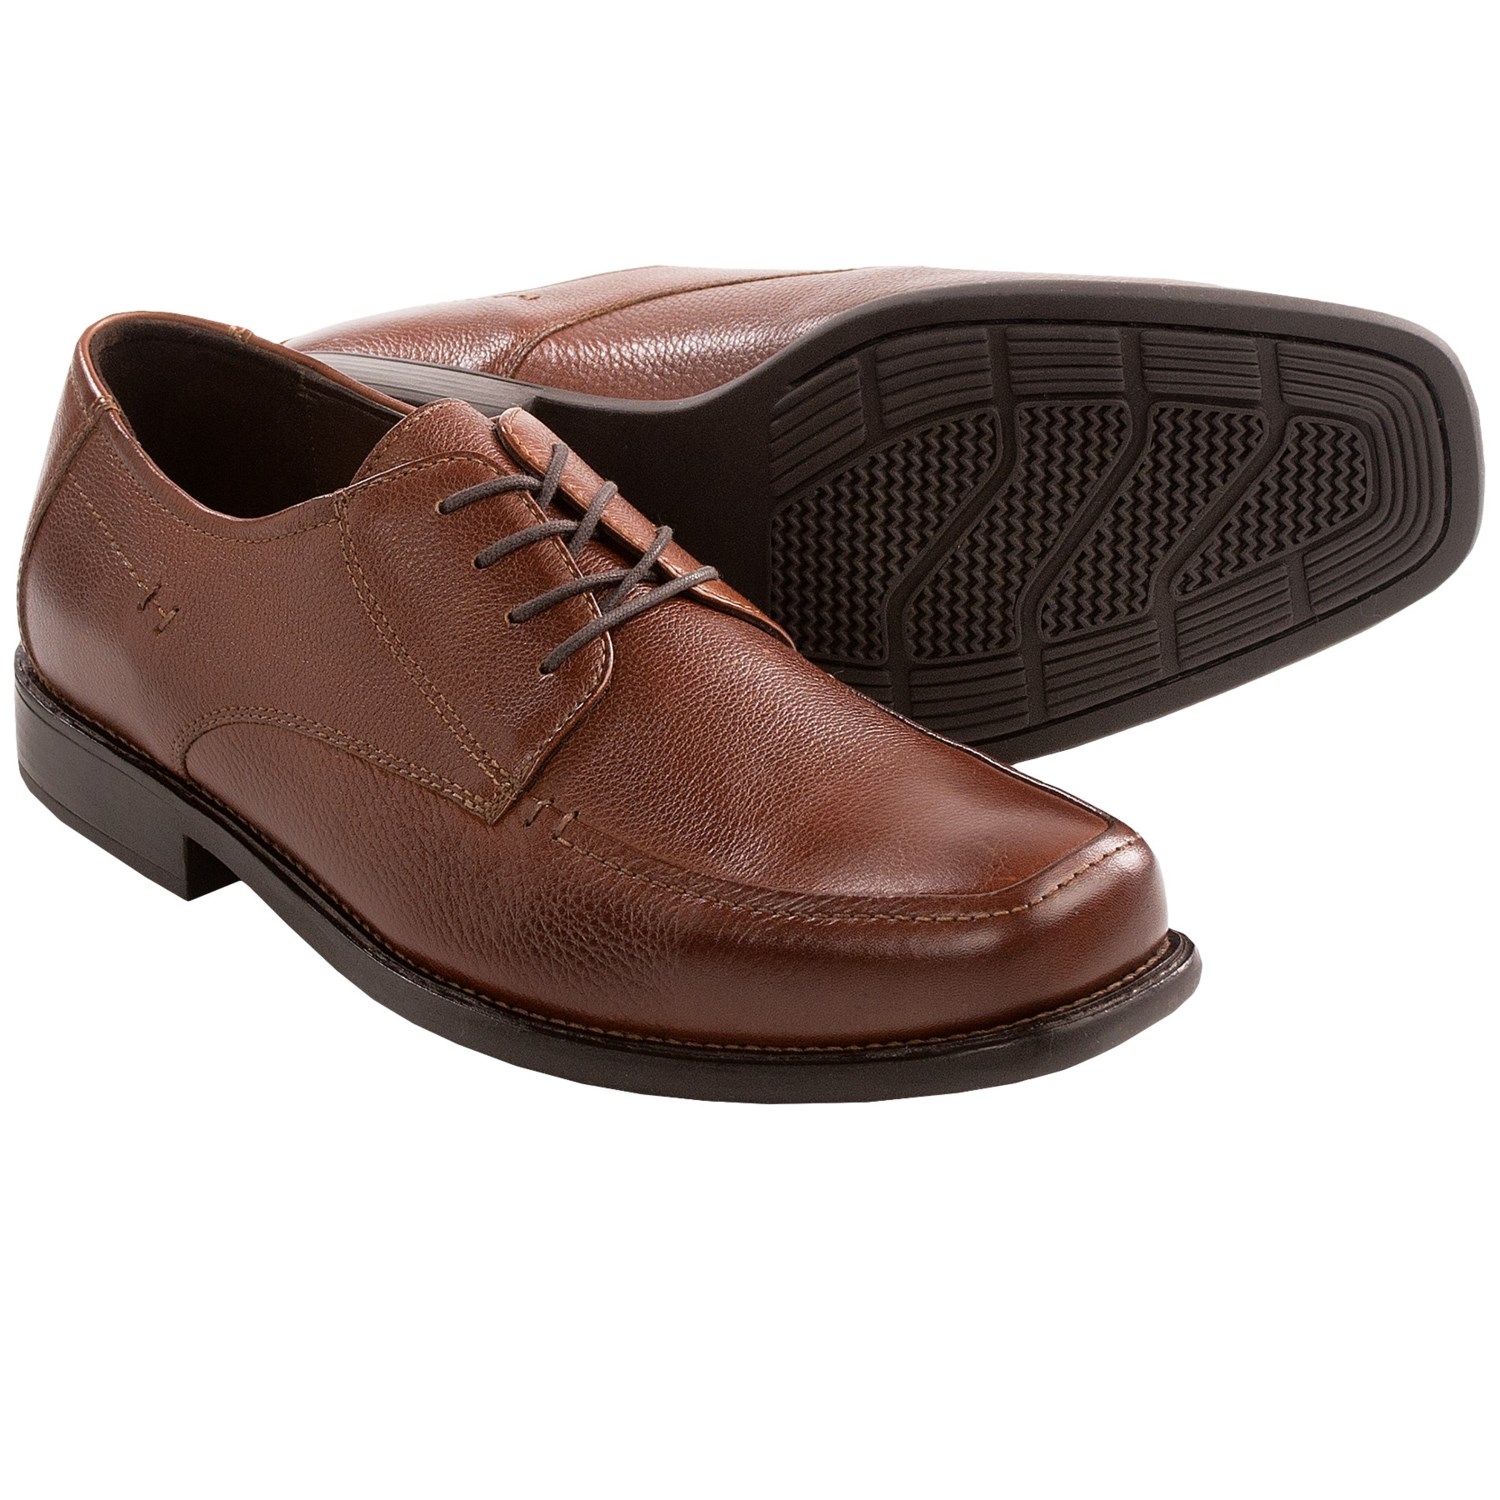 johnston-and-murphy-macomb-moc-toe-shoes-leather-lace-ups-for-men-in ...